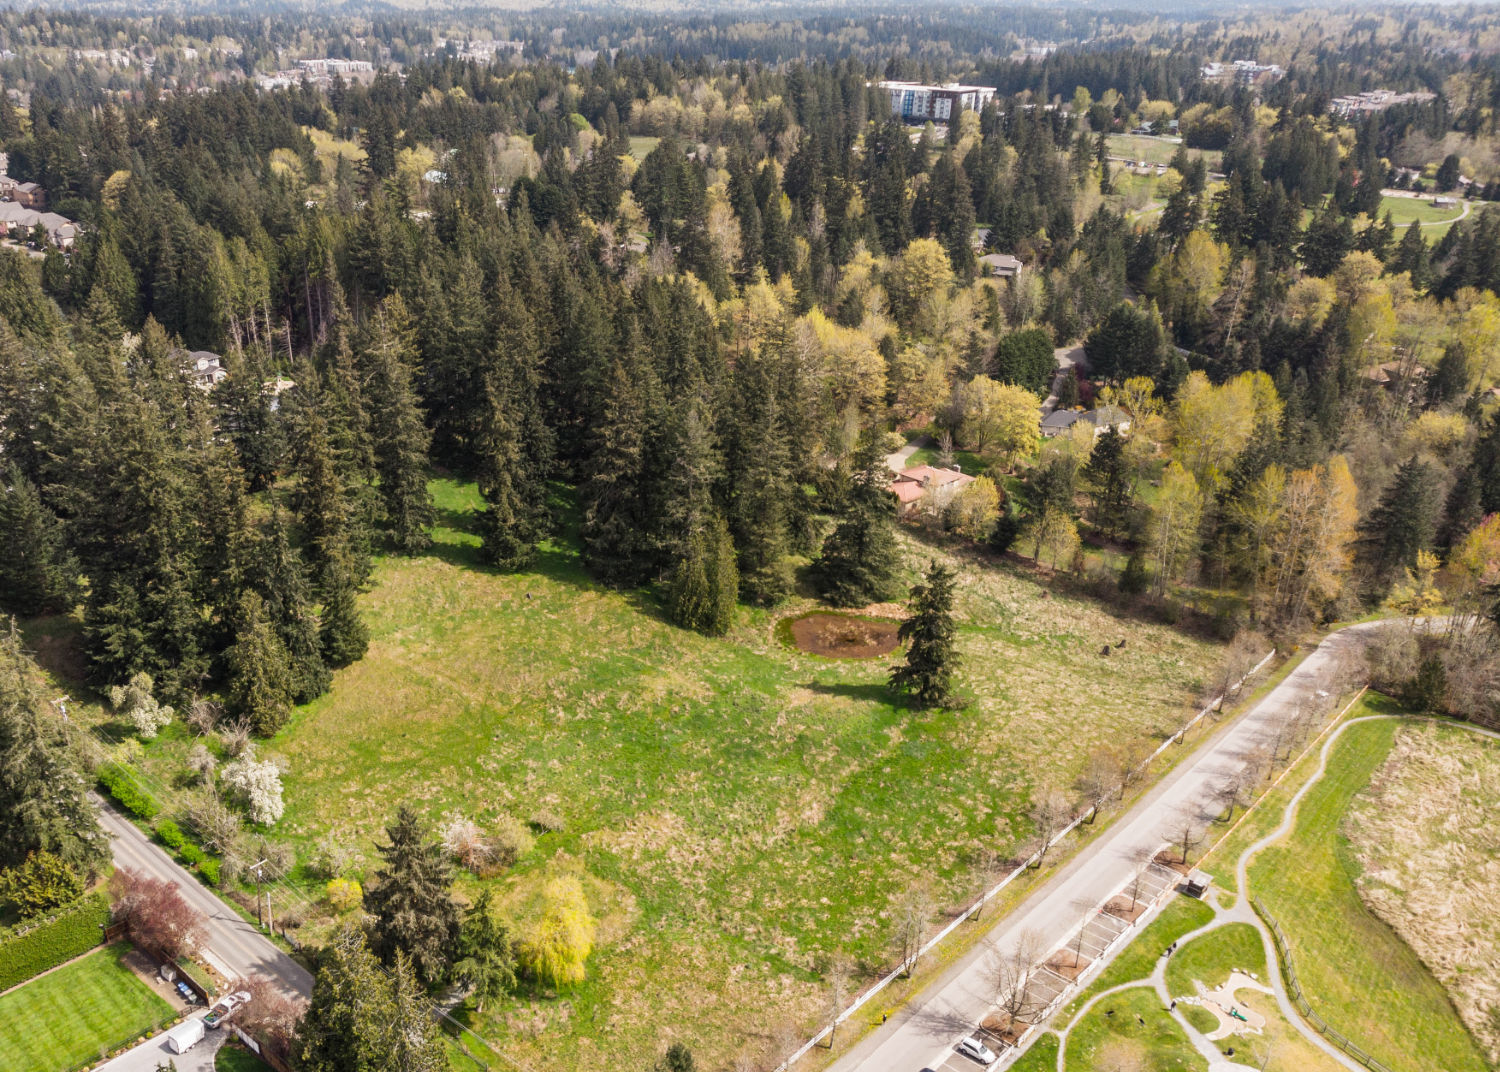 oblique image of Big Rock Park South showing grassy field surrounded by forest and street with trees and parking